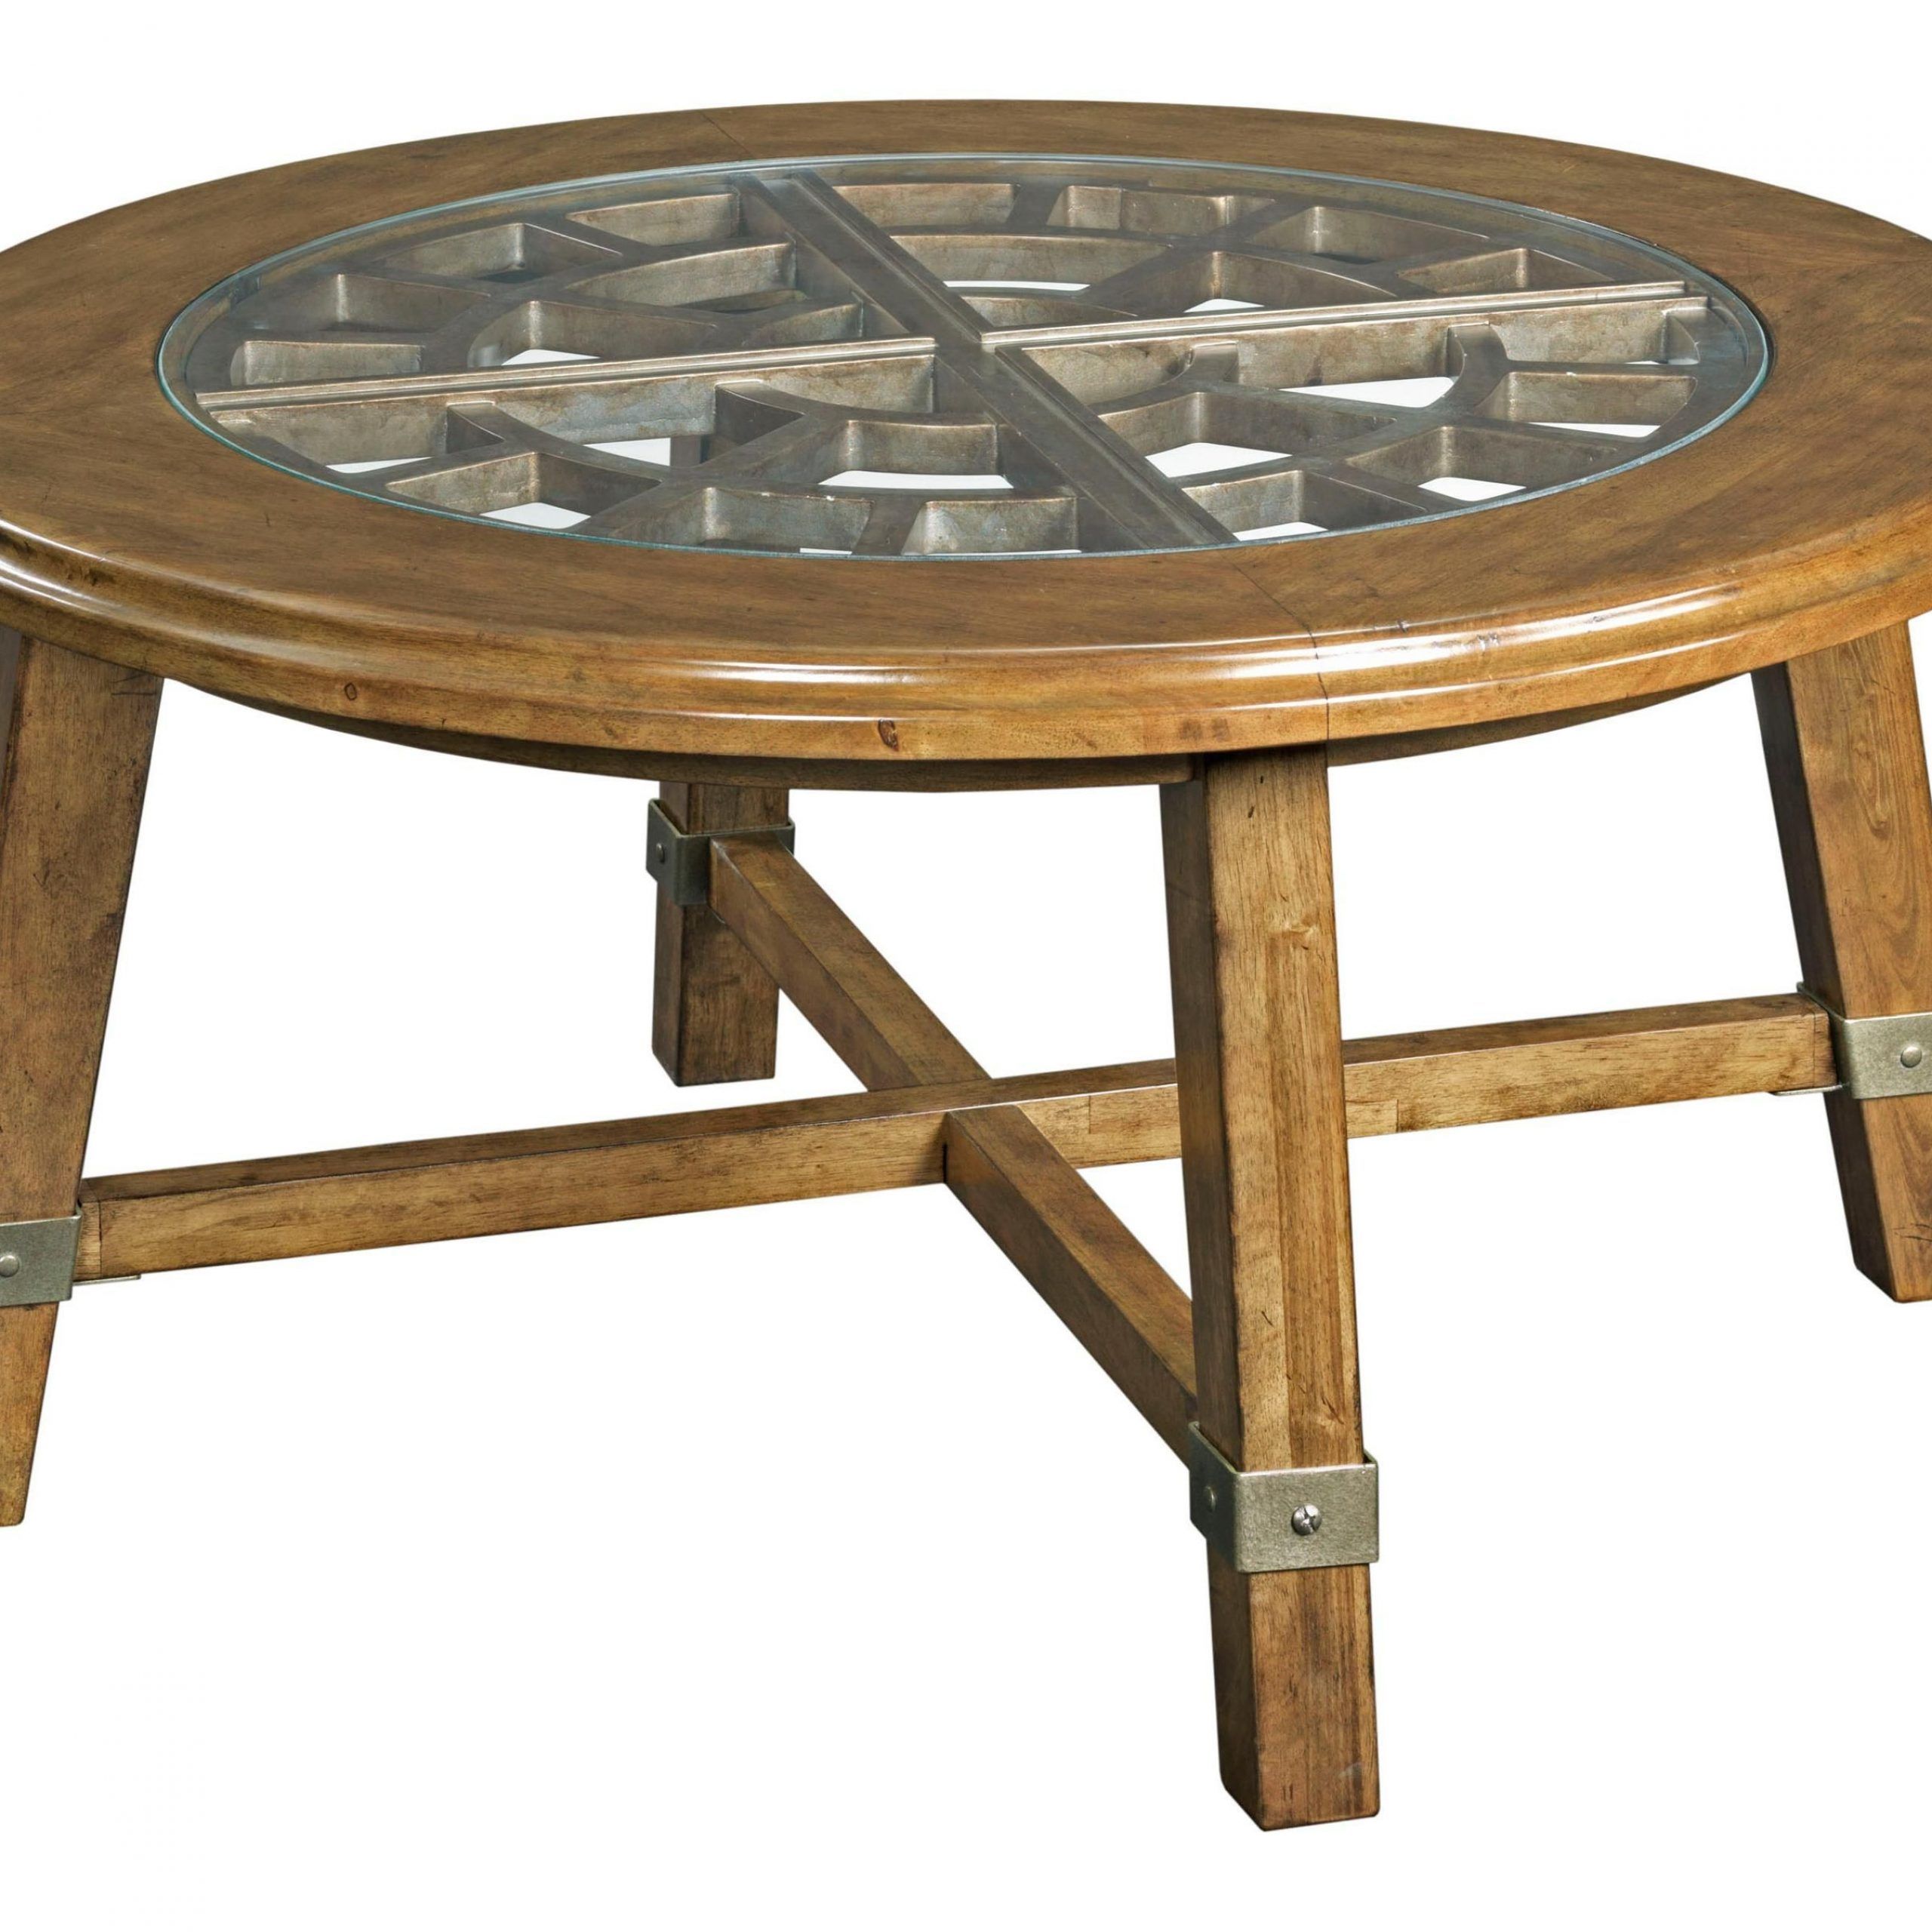 Widely Used Antique Brass Round Cocktail Tables Regarding A Mix Of Metal, Glass, And Wood Materials Give This Round Grid Cocktail (View 1 of 10)